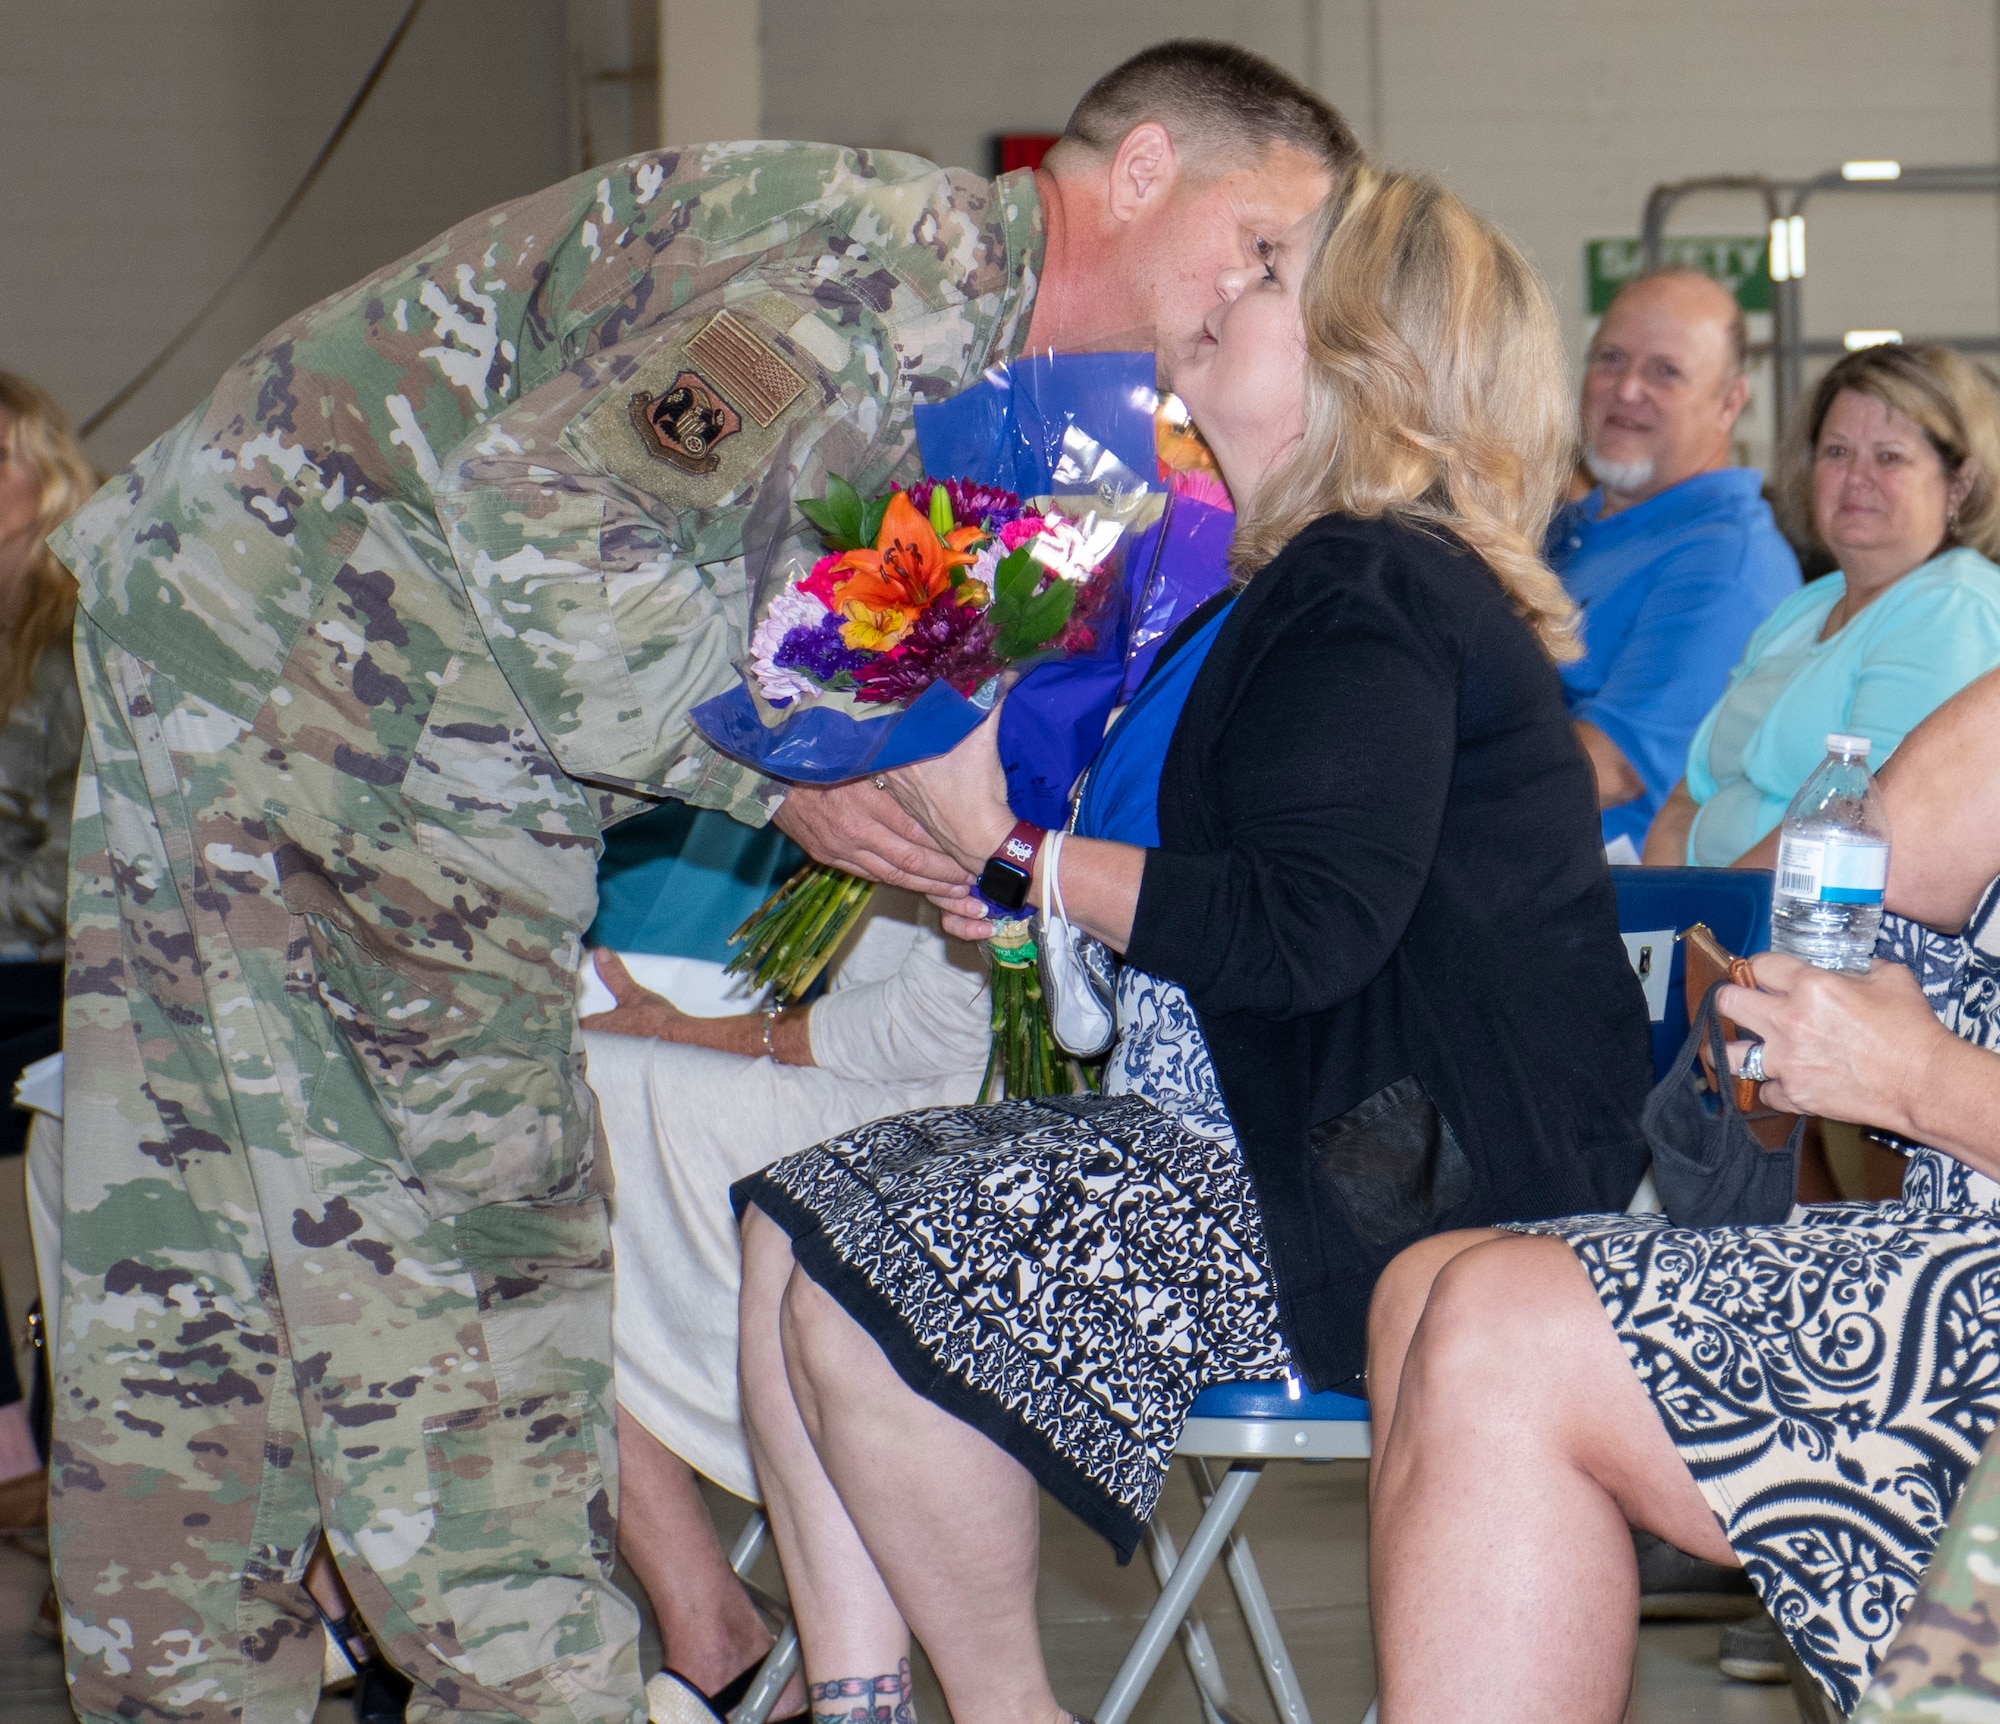 U.S. Air Force Lt. Col. McLeod hands his wife flowers and thanks her for her support on Aug. 7, 2021 at Whiteman Air Force Base, Mo. (U.S. Air Force photo by Maj. Shelley Ecklebe)